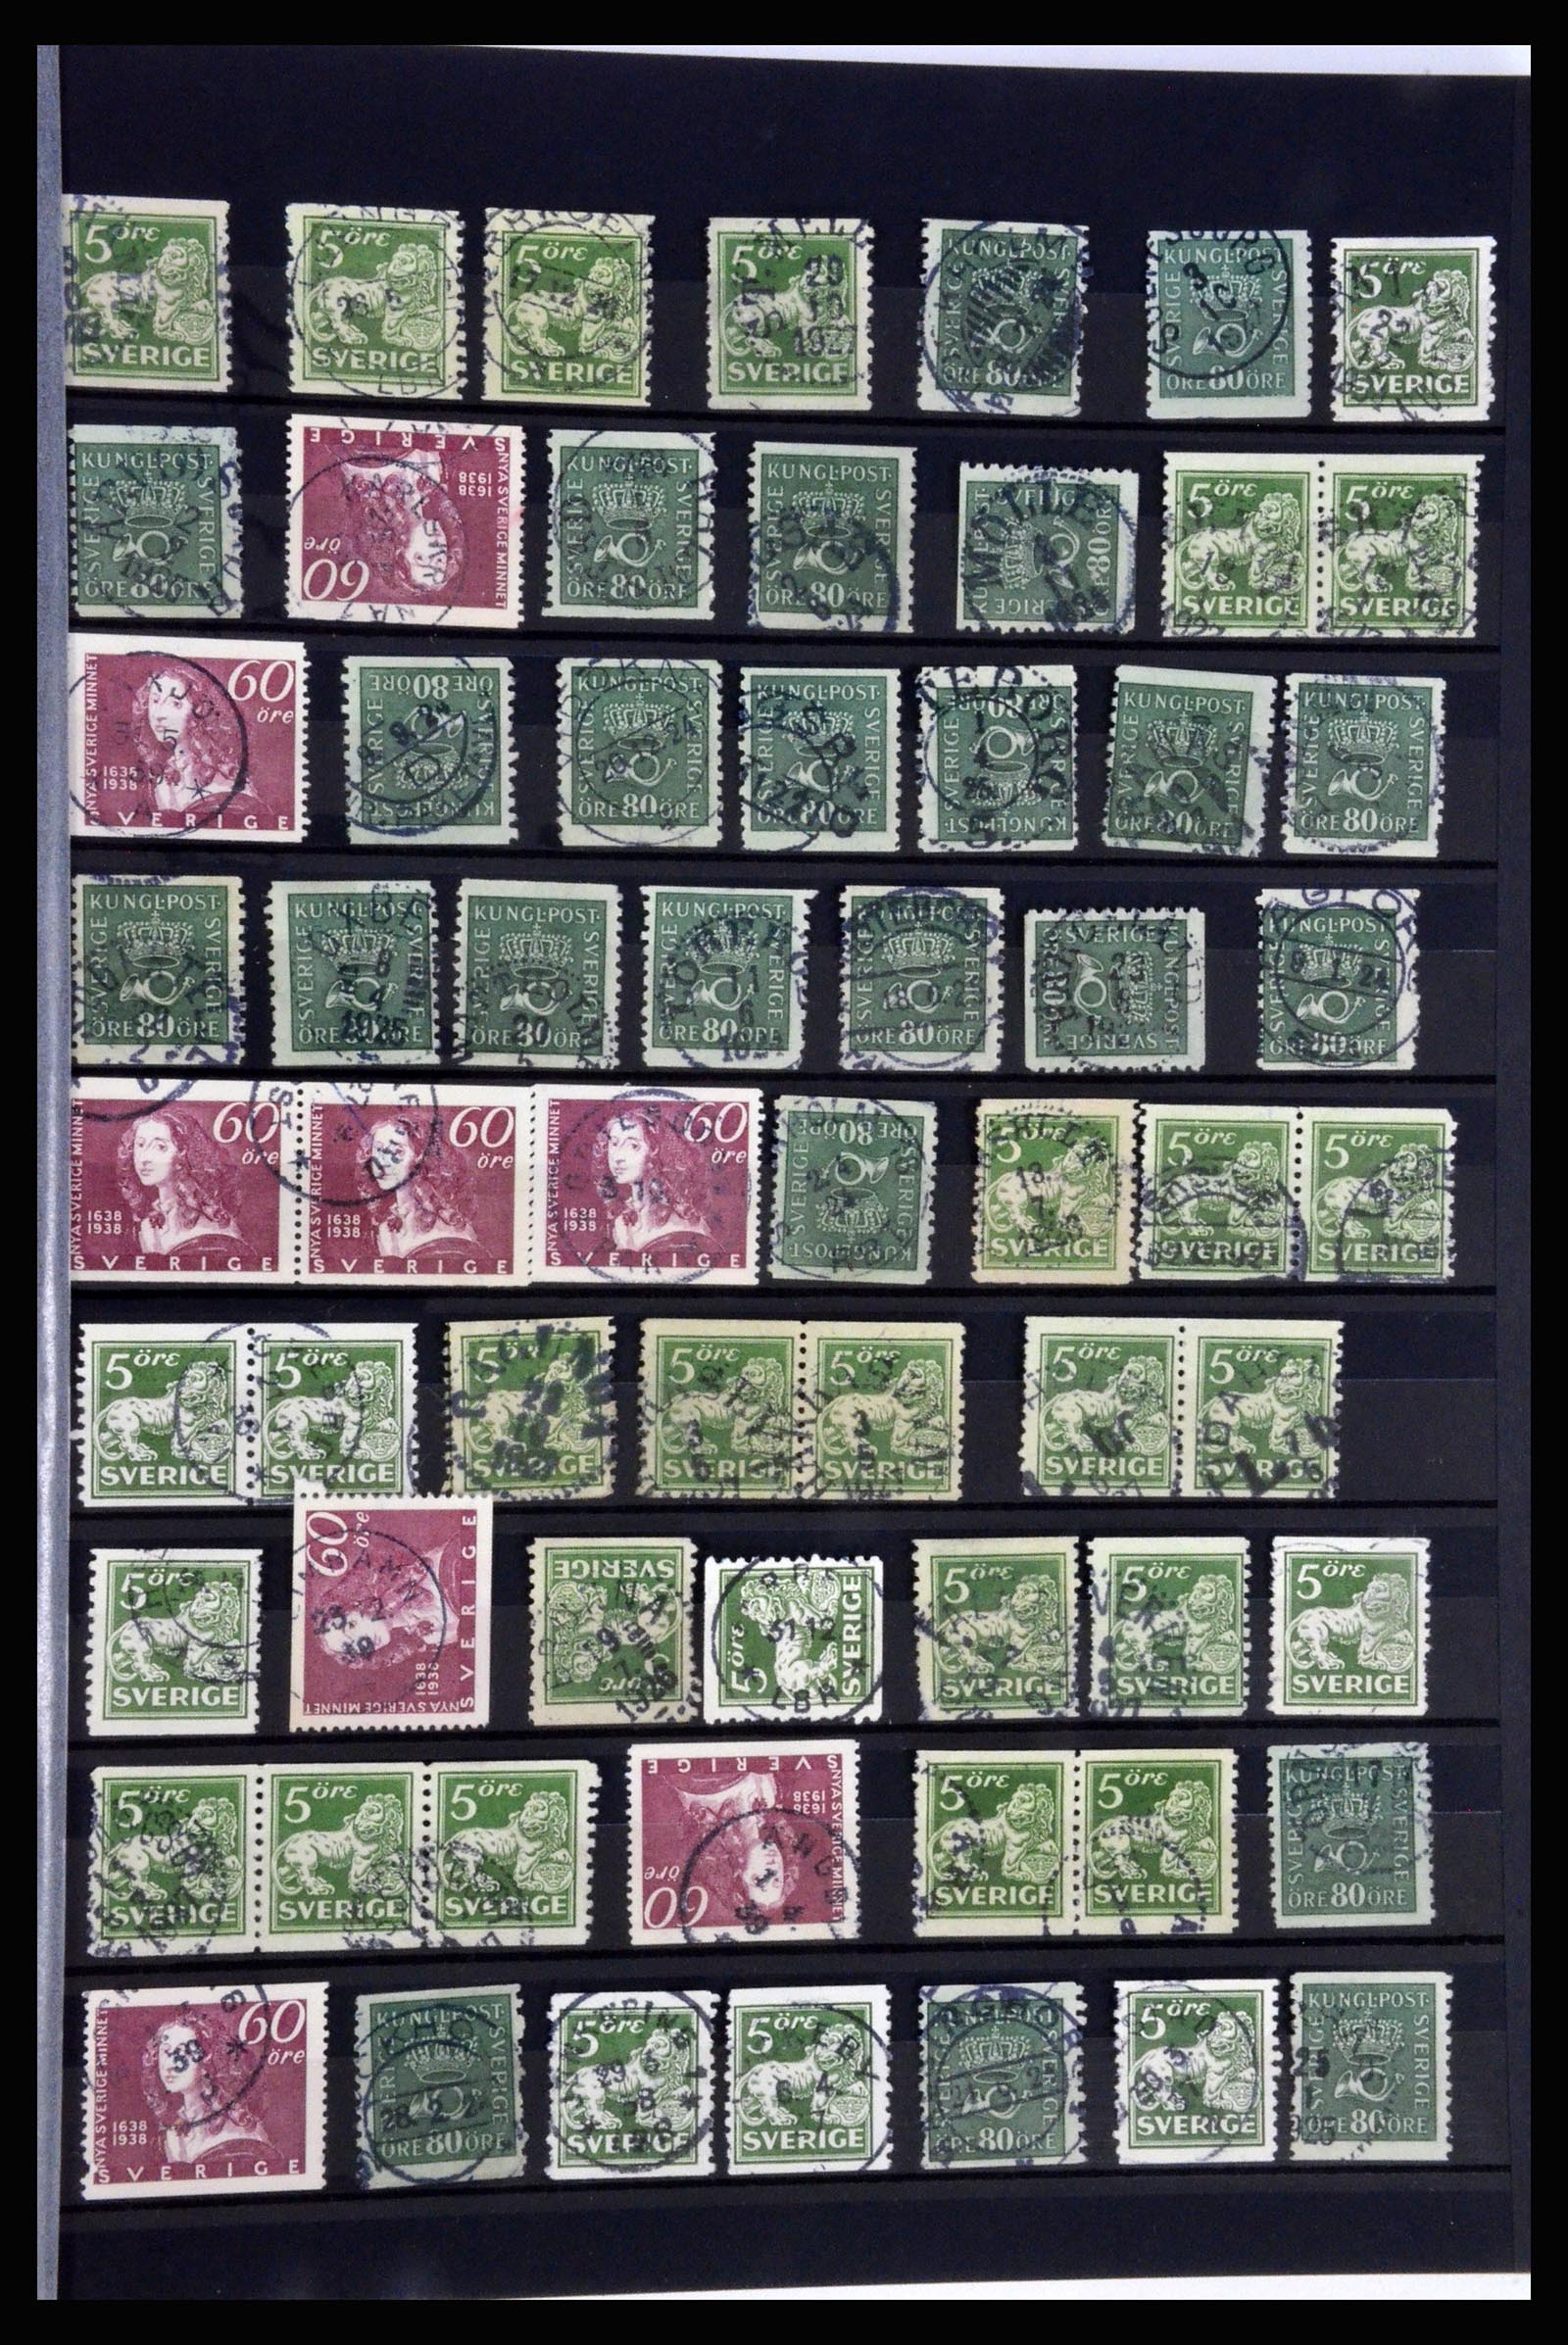 36316 019 - Stamp collection 36316 Sweden cancellations 1920-1938.